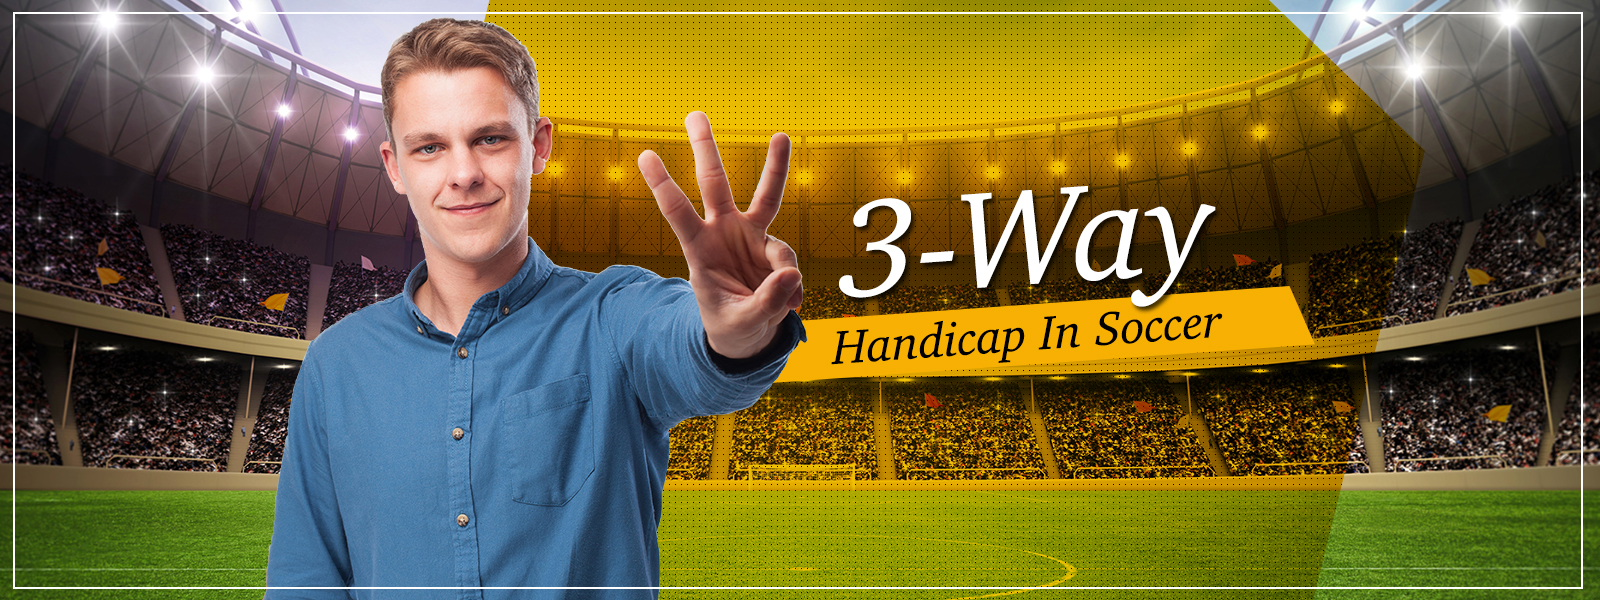 Can you explain a '3-way handicap' in soccer1